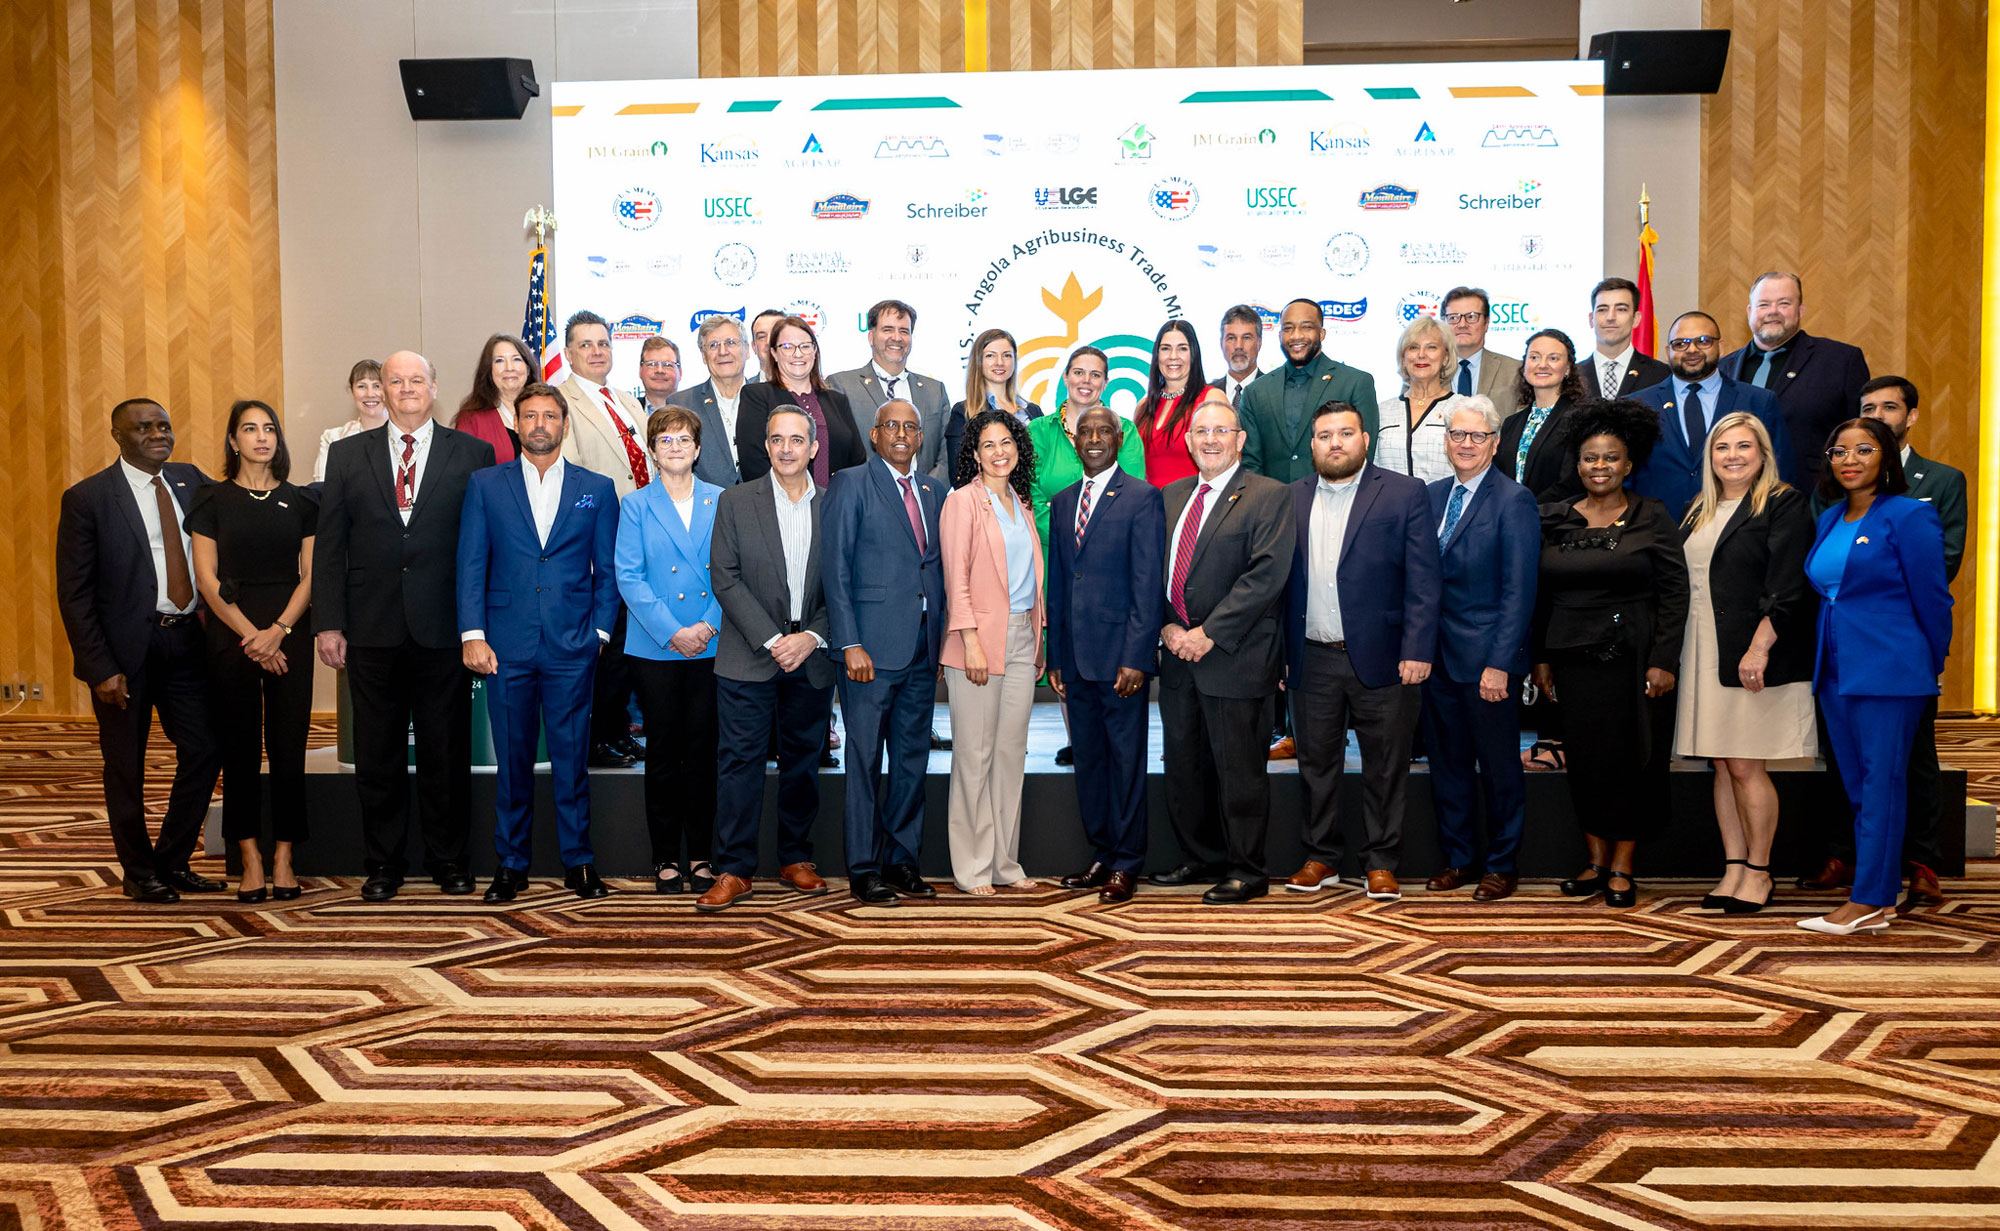 Deputy Secretary Torres Small is accompanied by U.S.-based State Departments of Agriculture, State and Regional Trade Groups, and Cooperators in a group shot